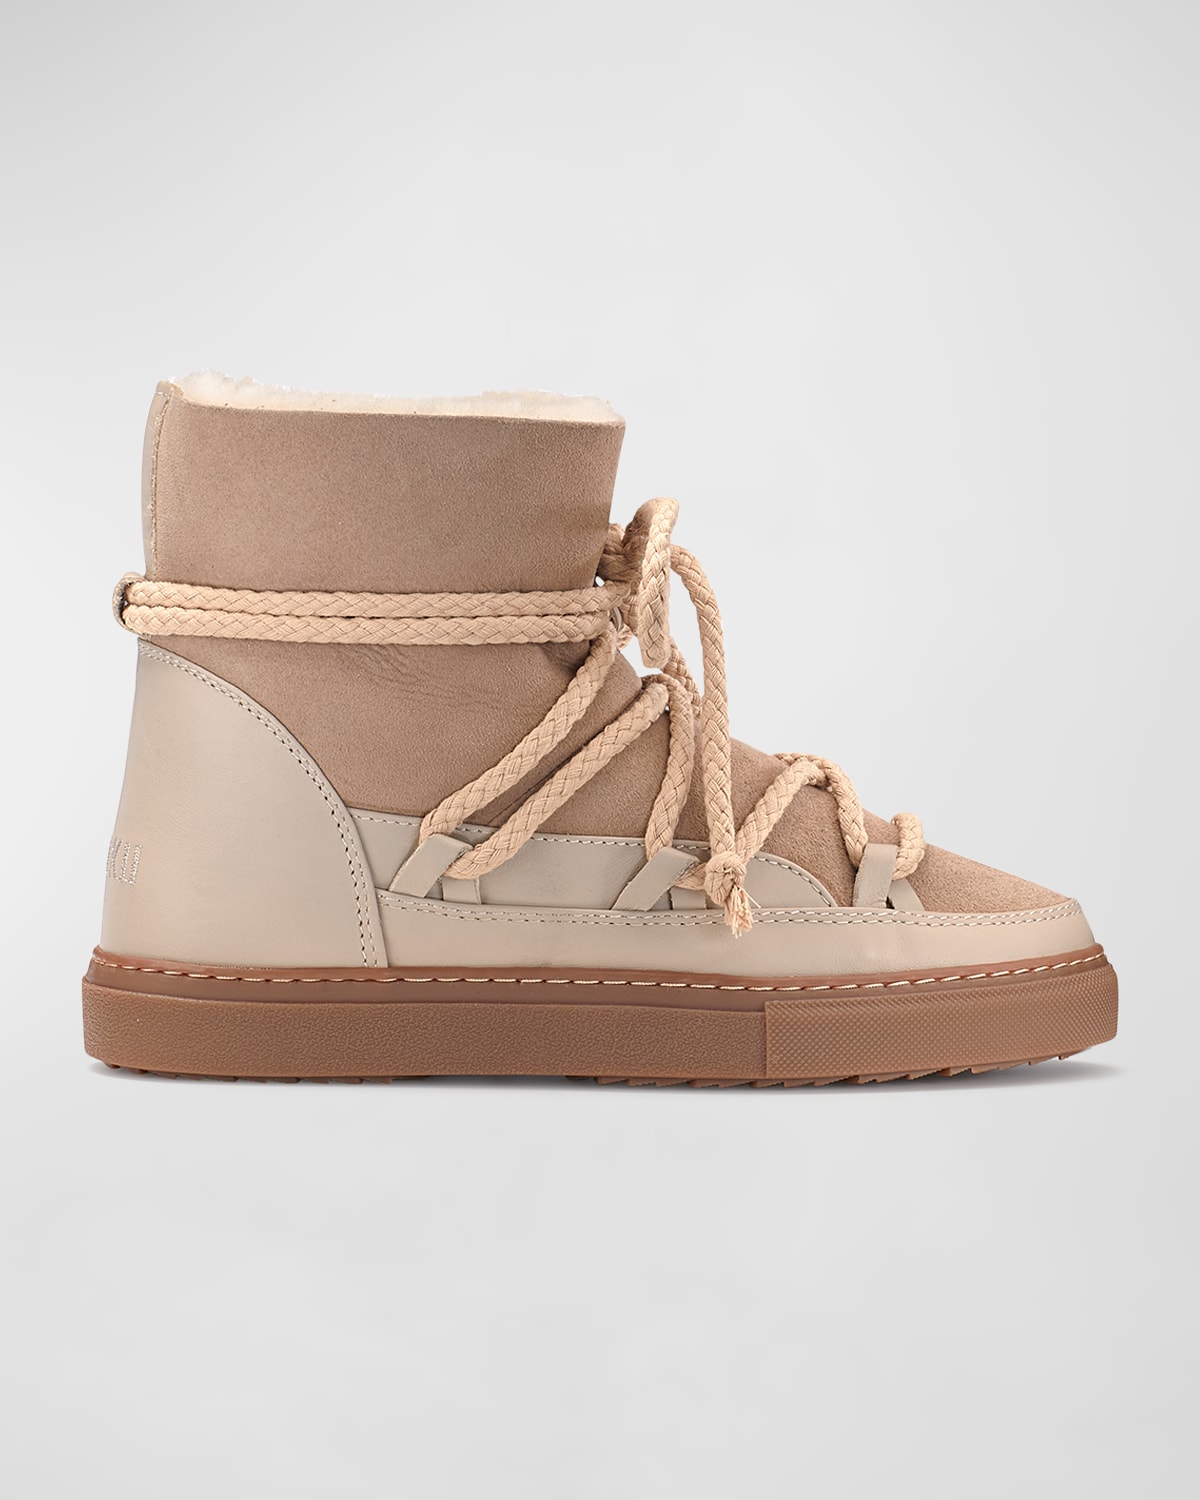 Inuikii Classic Mixed Leather Shearling Snow Booties